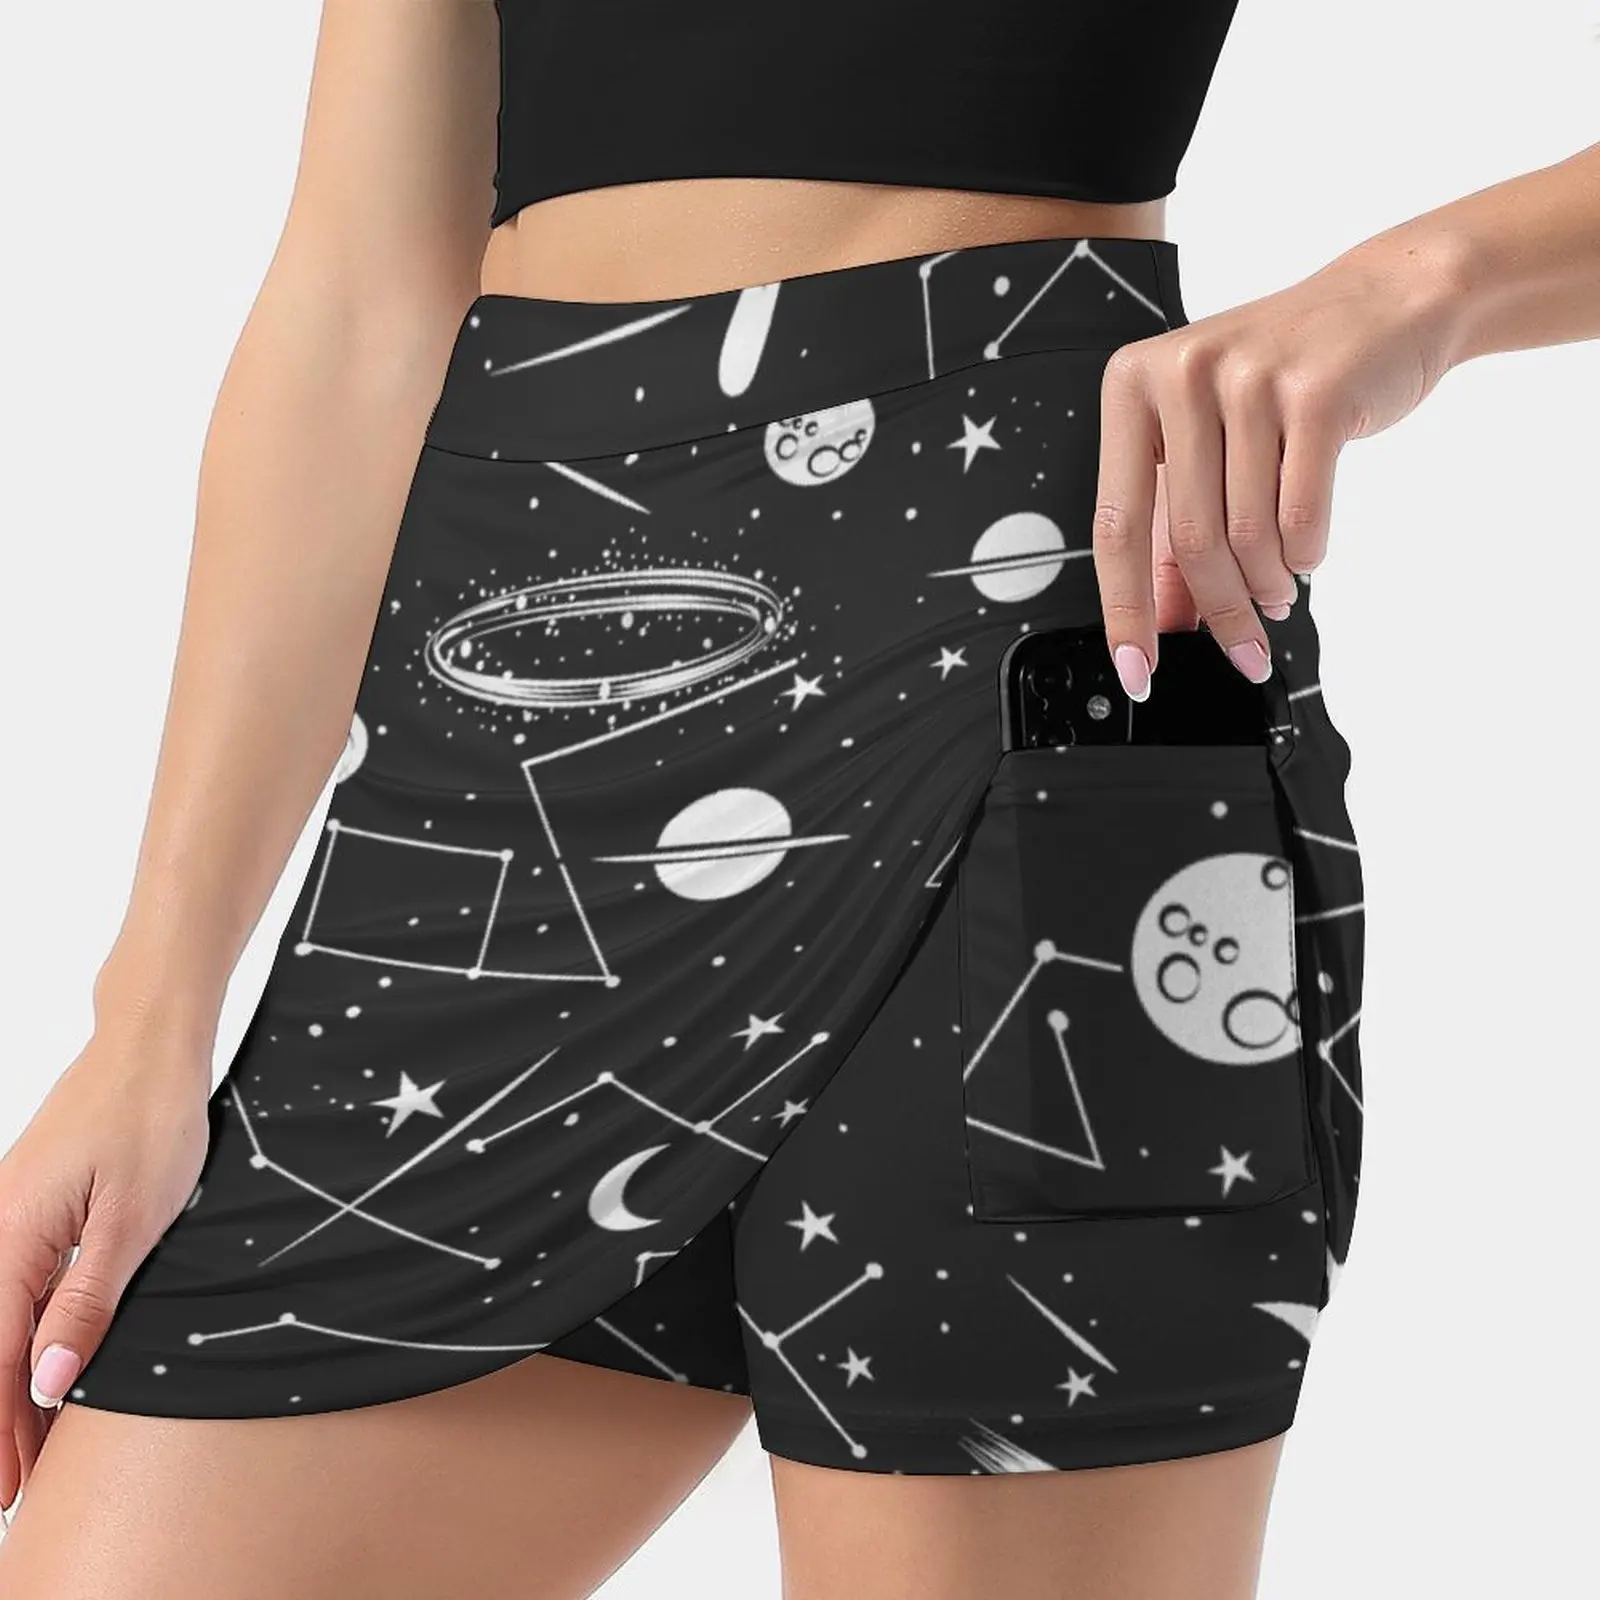 

My Own Space Women's skirt Y2K Summer Clothes 2022 Kpop Style Trouser Skirt With Pocket Space Planets Moon Star Kite Astronomy